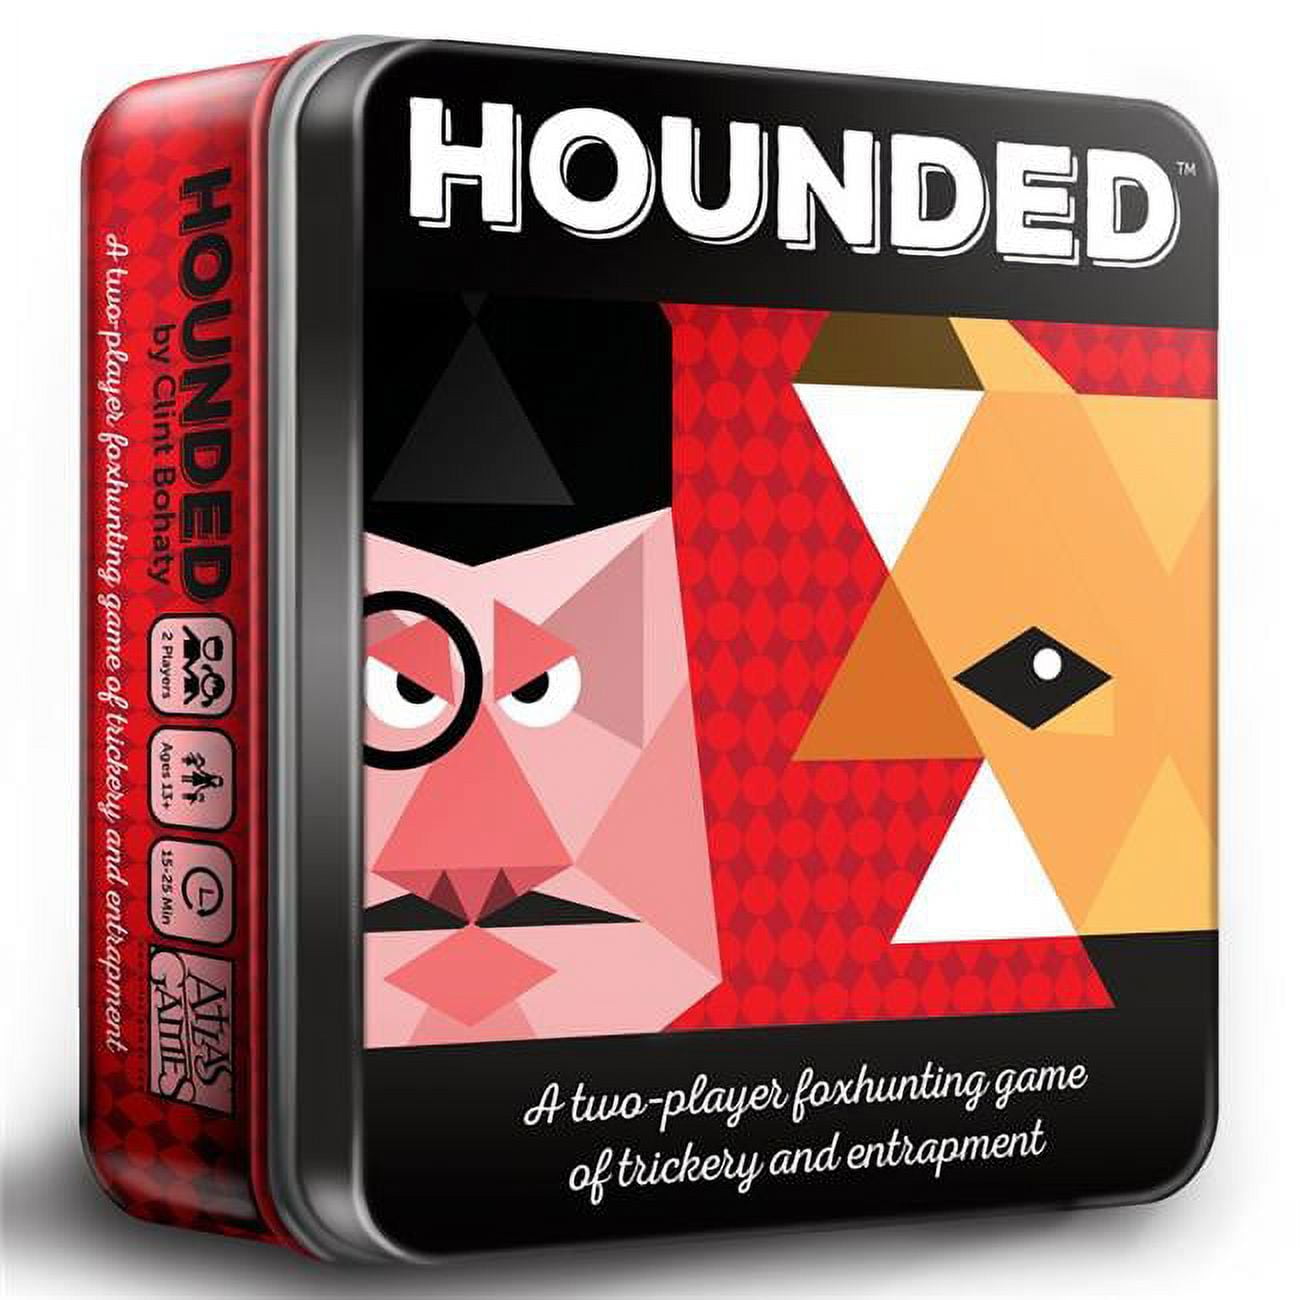 ISBN 9781589781740 product image for ATG1380 Hounded Board Game | upcitemdb.com